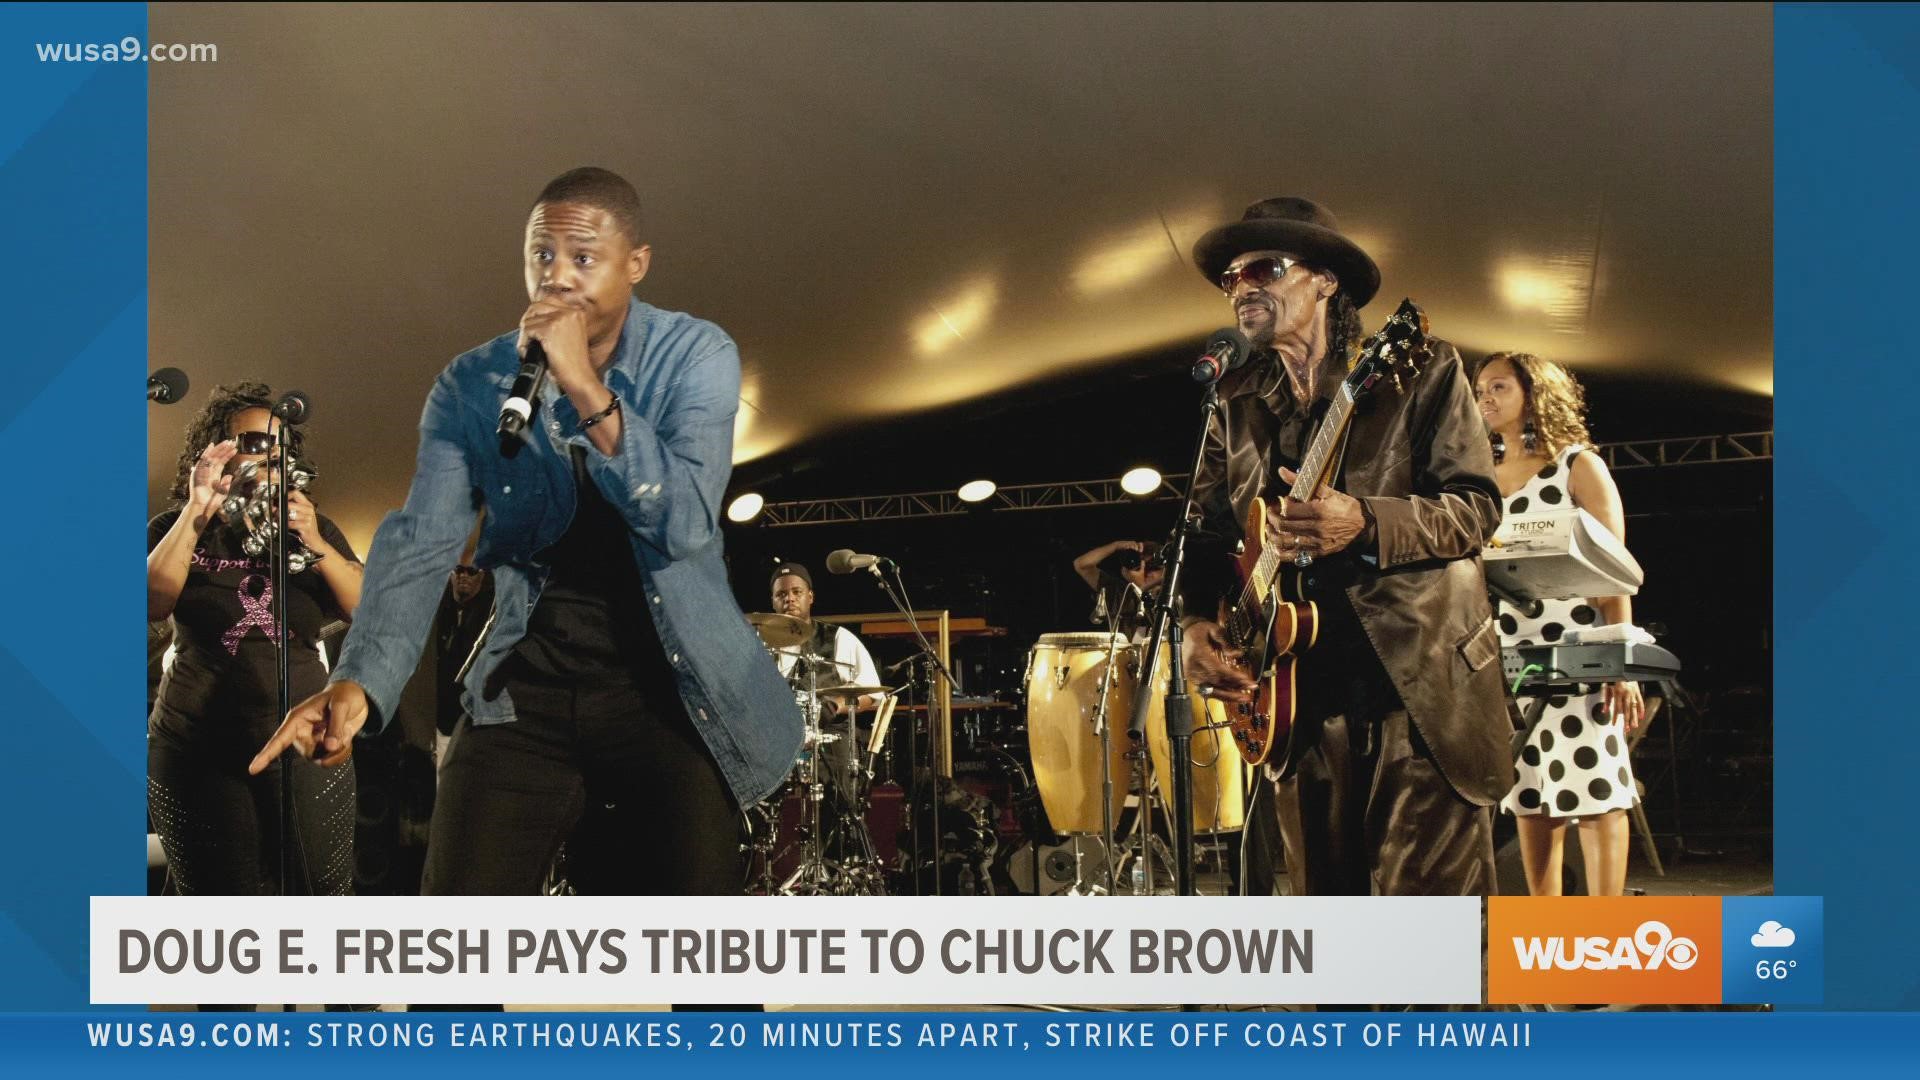 Hip-hop artist Doug E. Fresh is going for a Grammy with a tribute project to the Legendary Chuck Brown.